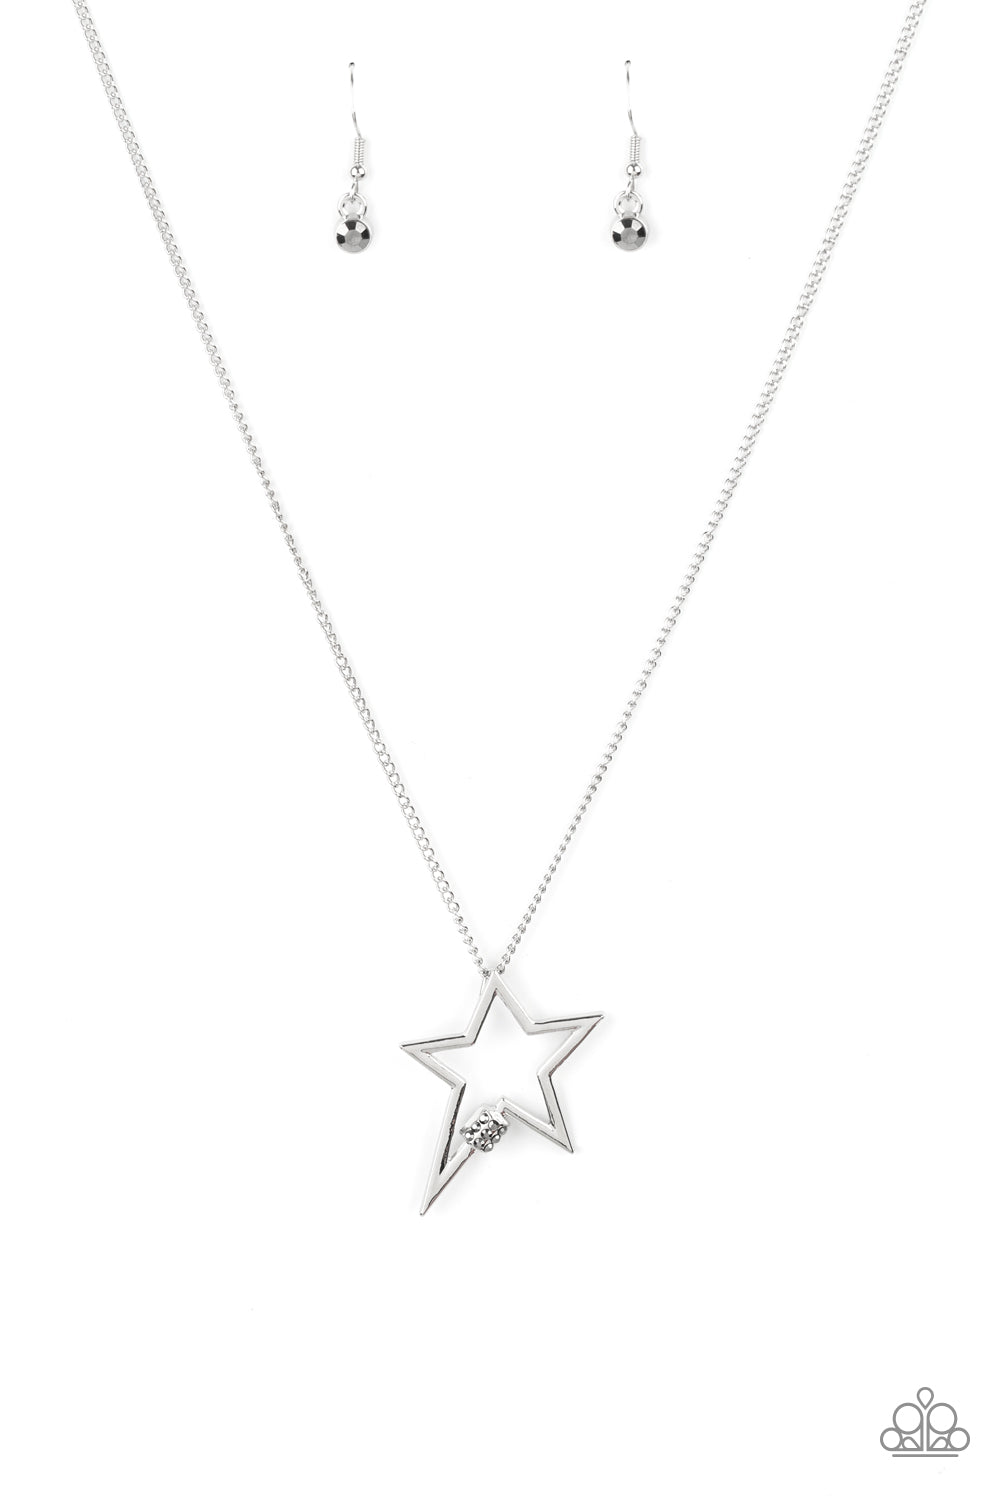 Light Up The Sky Necklace (Gold, Silver, White)